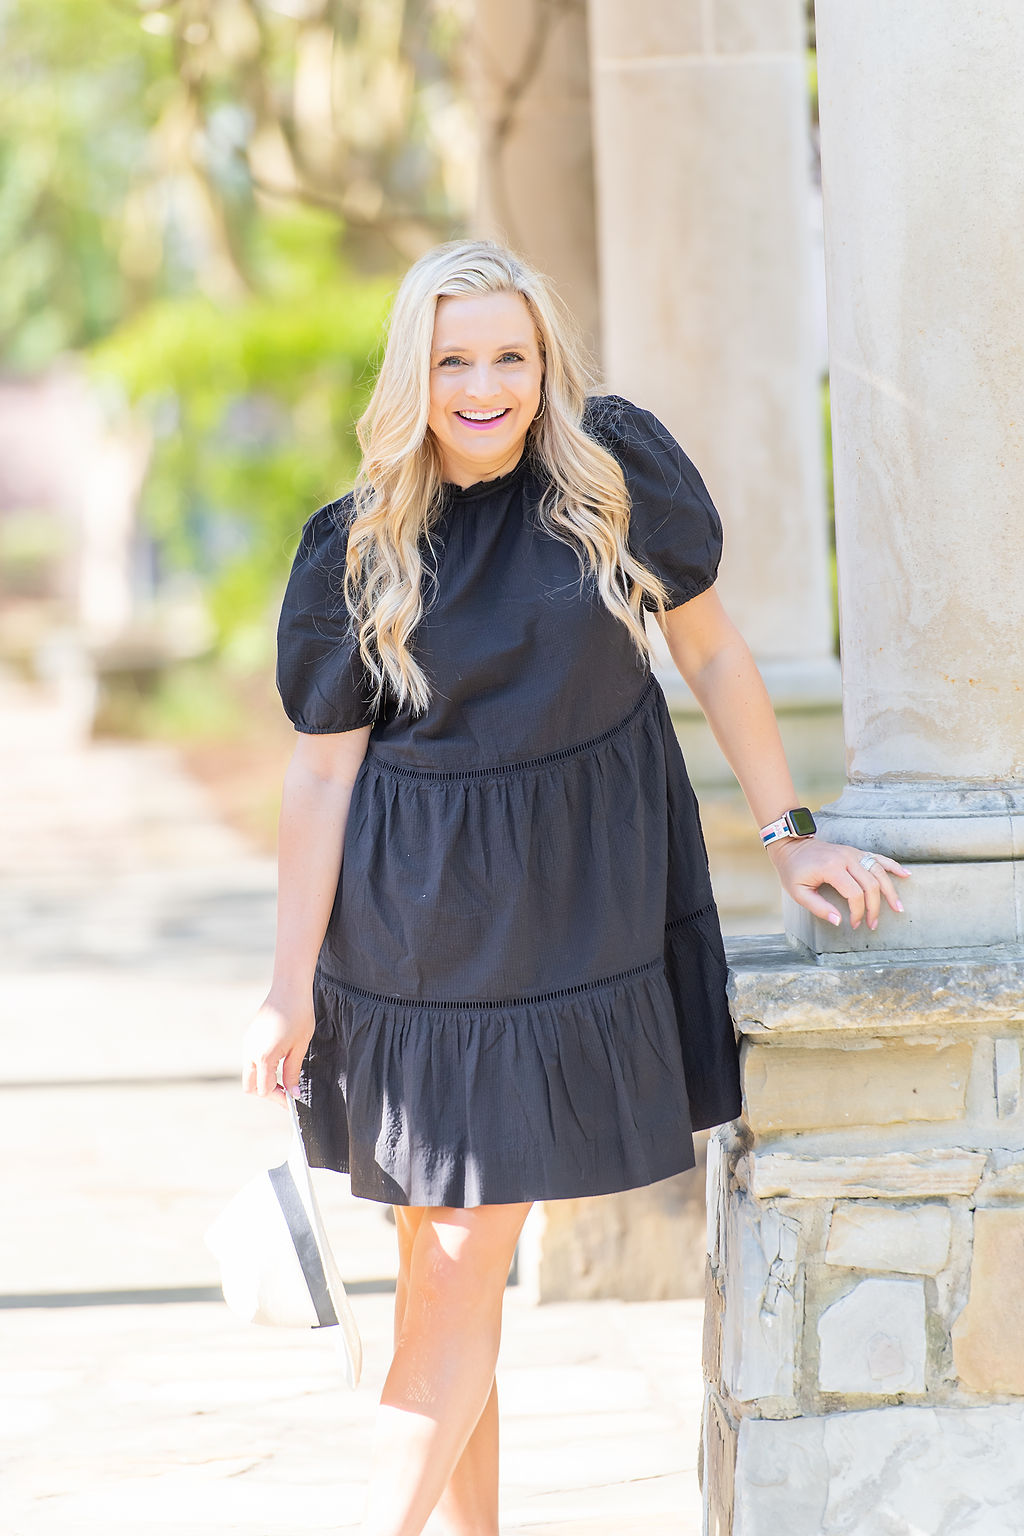 Little Black Dresses by popular Houston fashion blog, The House of Fancy: image of a woman wearing a black baby doll dress, white fedora hat, and studded strap sandals. 